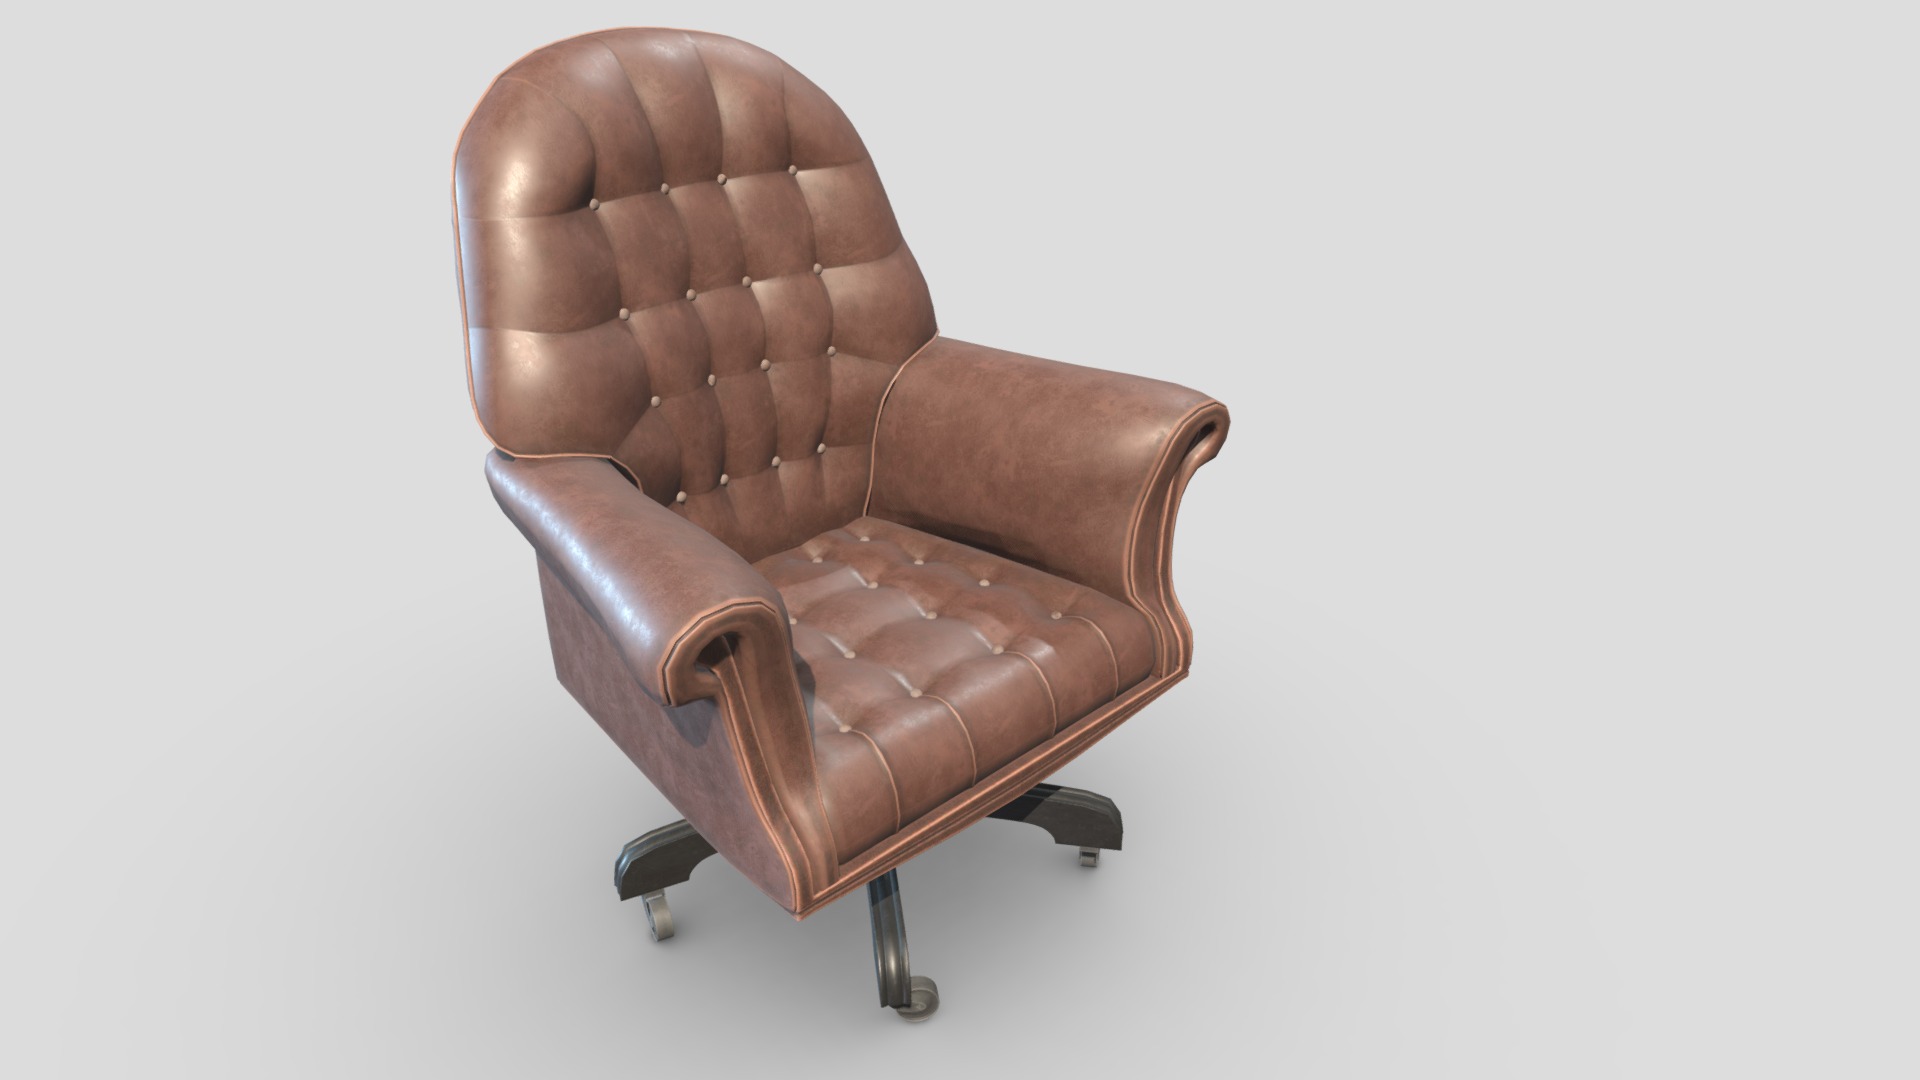 3D model Arm Chair 32 - This is a 3D model of the Arm Chair 32. The 3D model is about a brown leather chair.